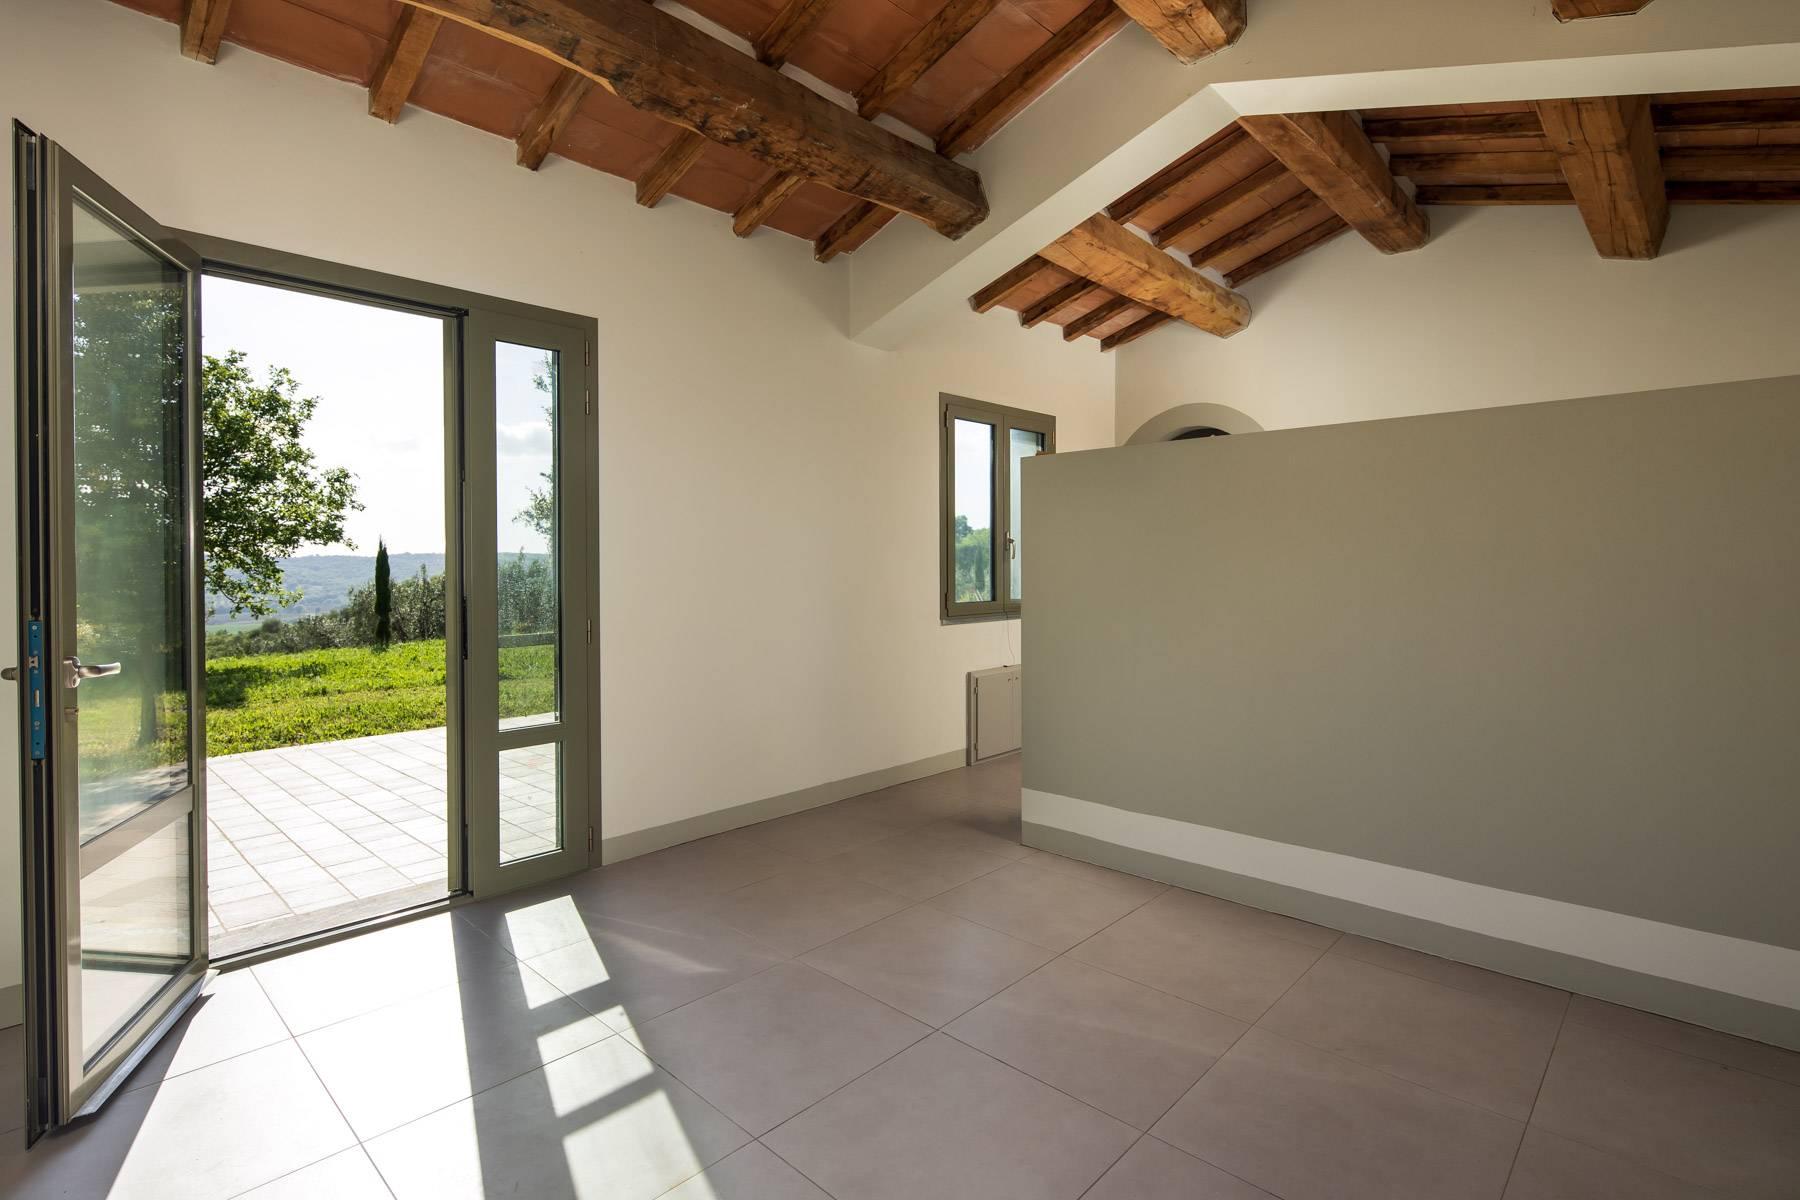 Top location overlooking Argentario and Giglio island - 20